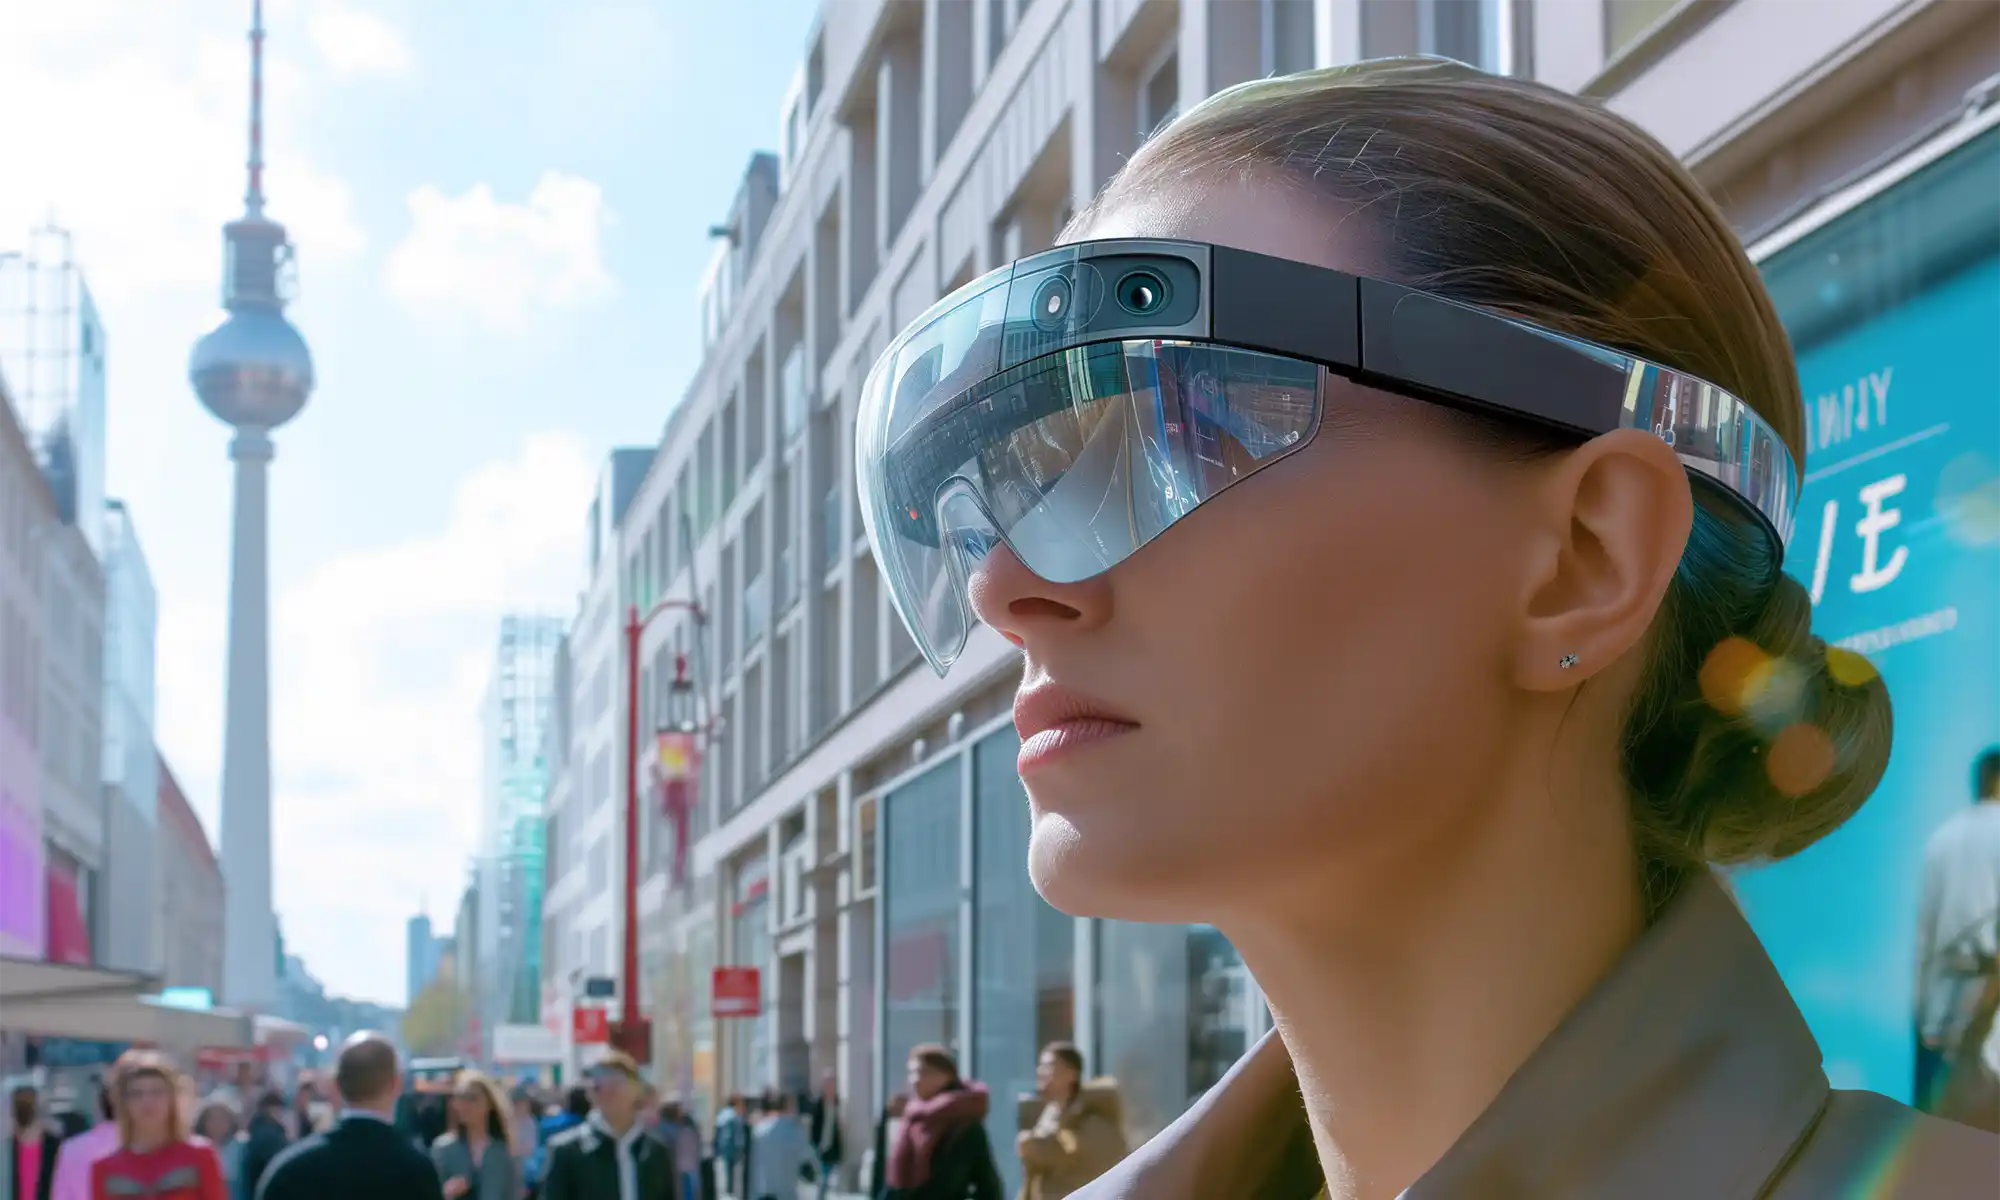 A woman wearing augmented reality smart glasses with a panoramic visor, standing on a busy city street with the Berlin TV Tower in the background.